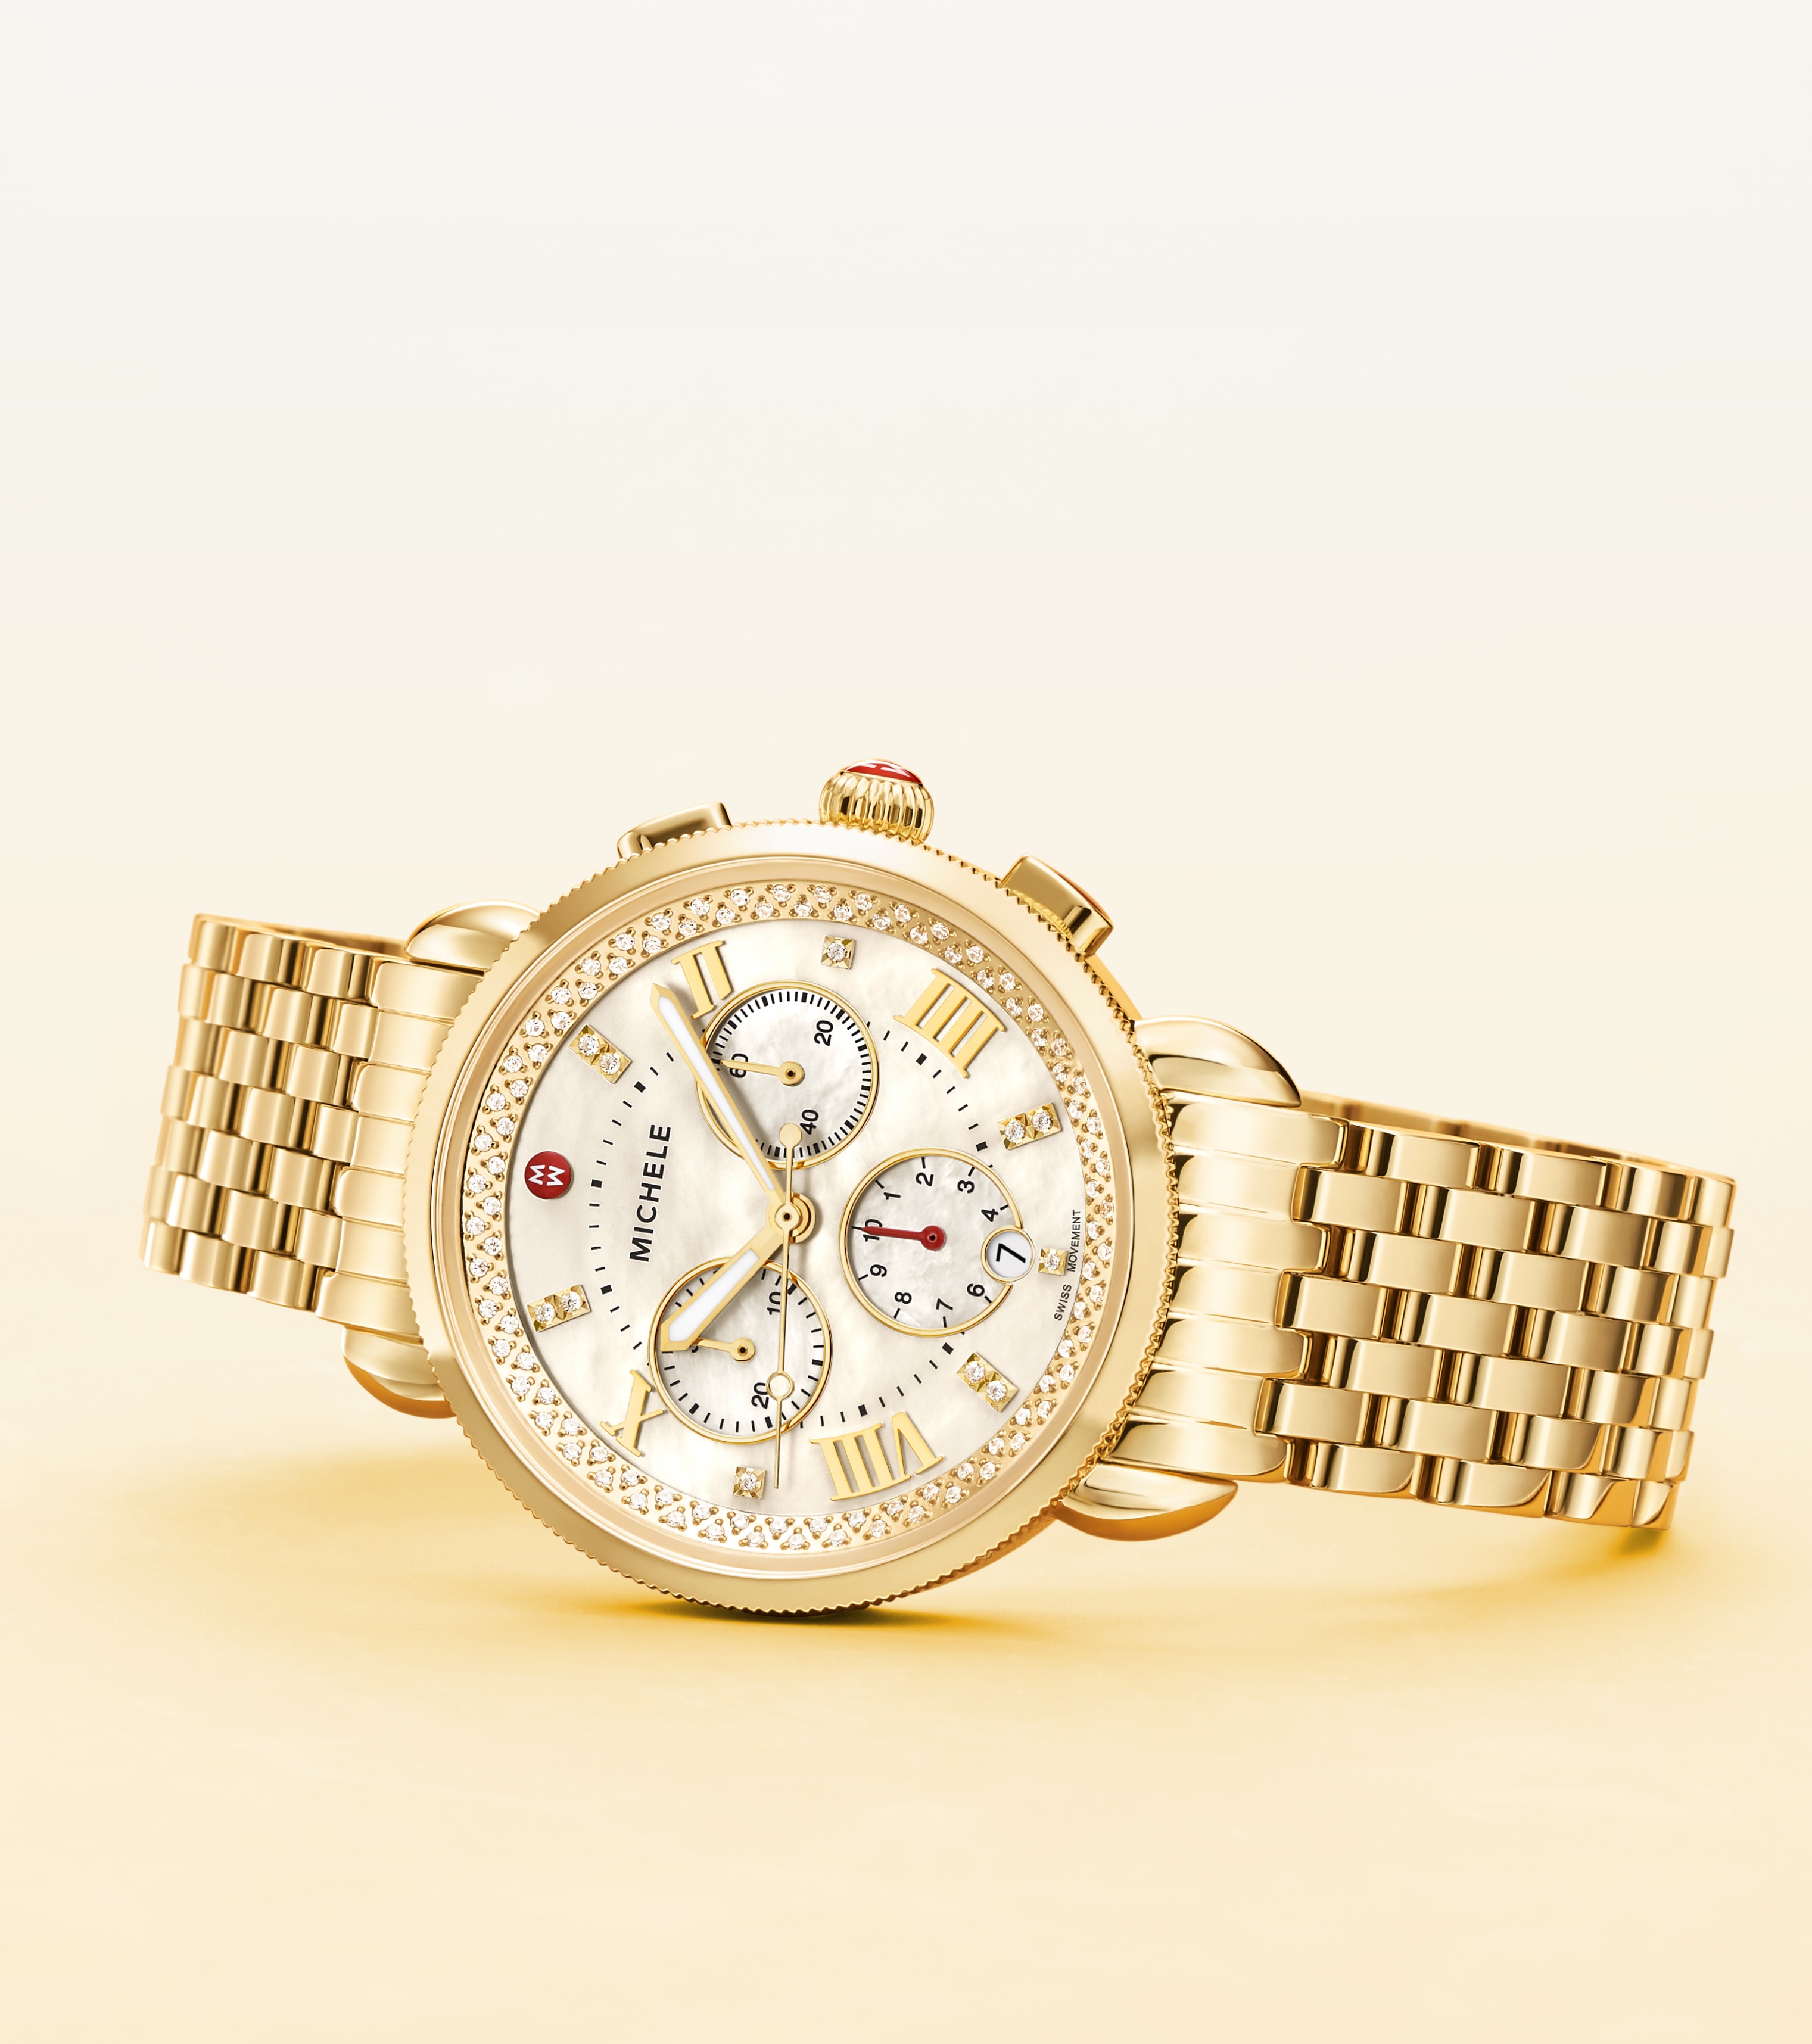 18K gold-plated Sport Sail watch